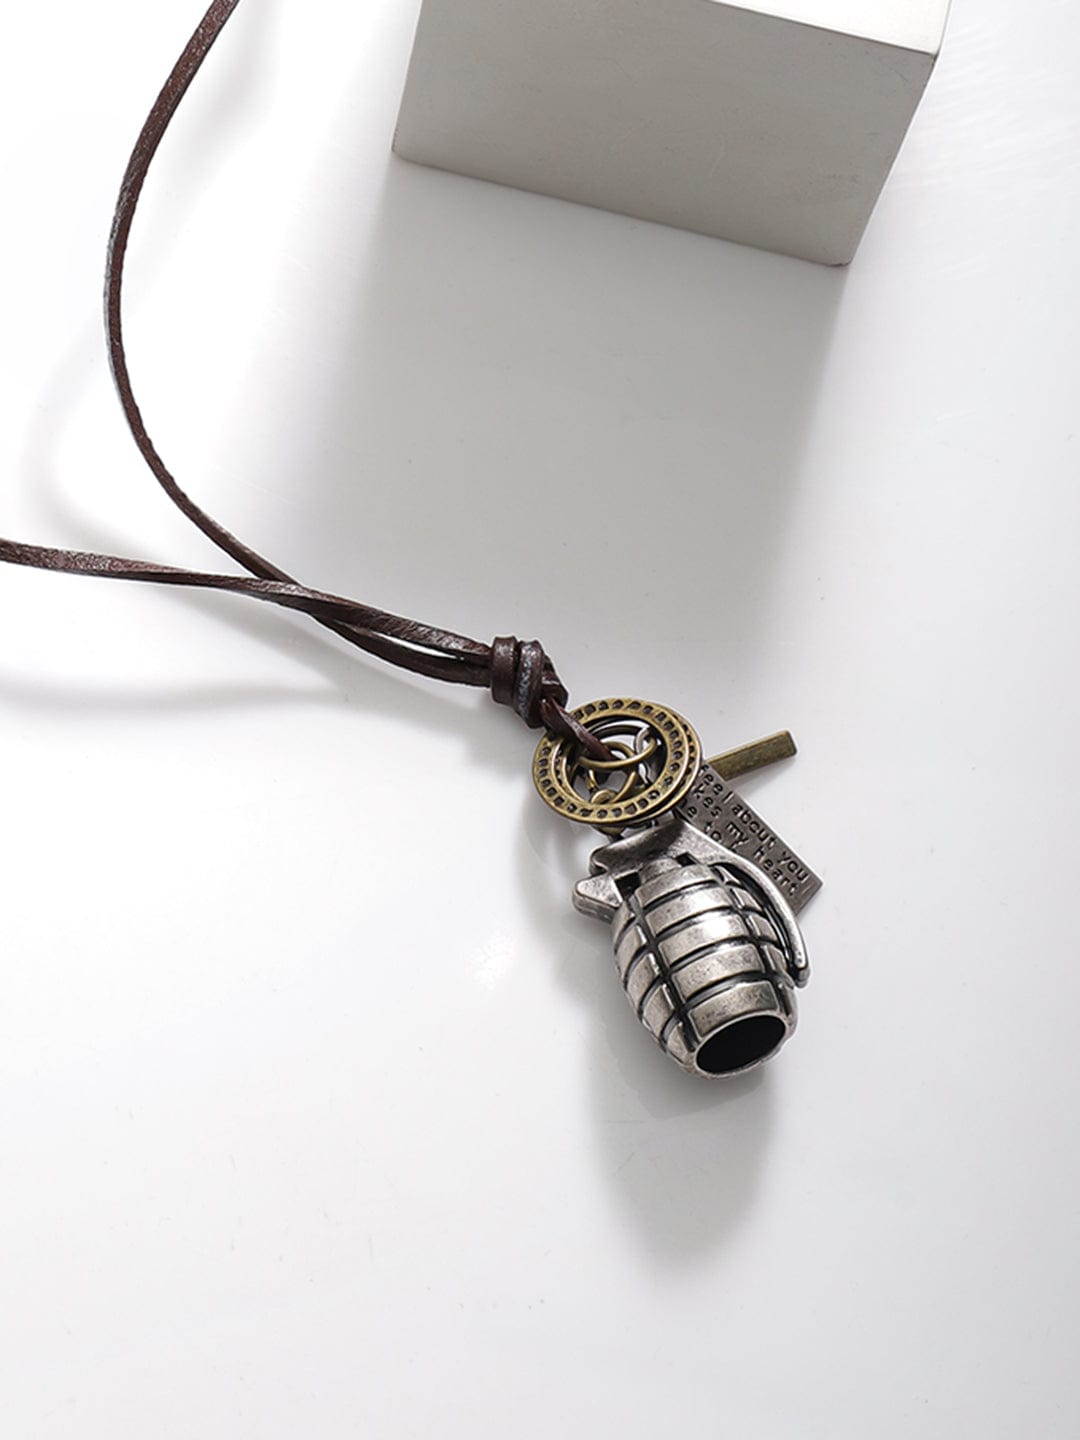 Voguish Men Grenade Pendant With Brown Lather Adjustable Necklace. Necklace and Chains